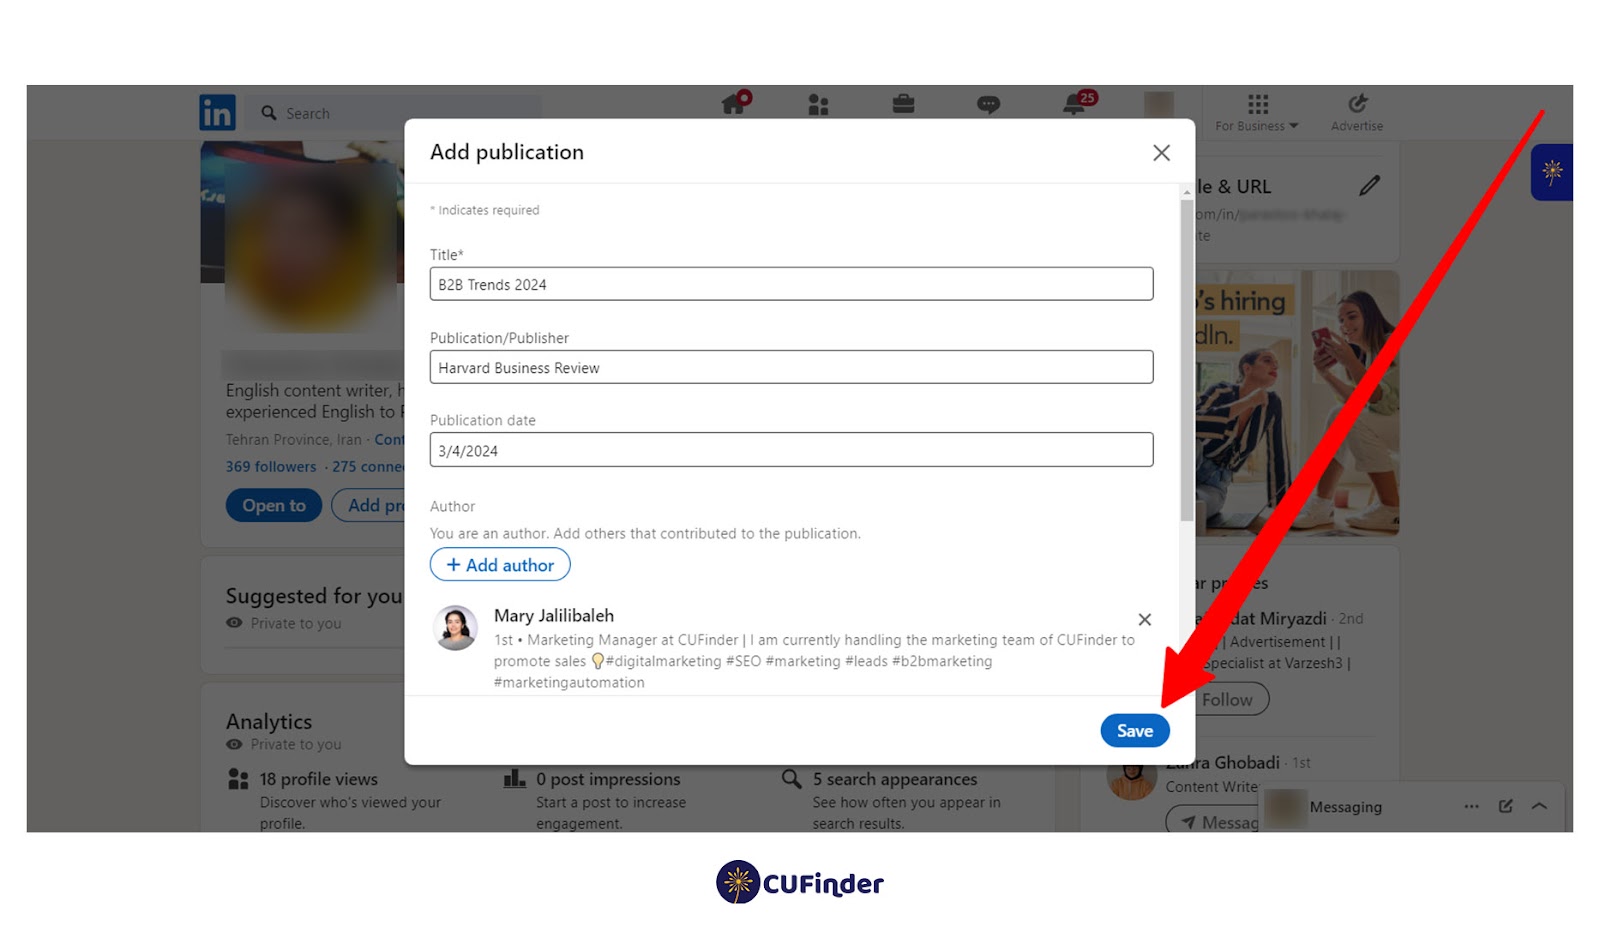 Save your changes to add the publication to your LinkedIn profile.